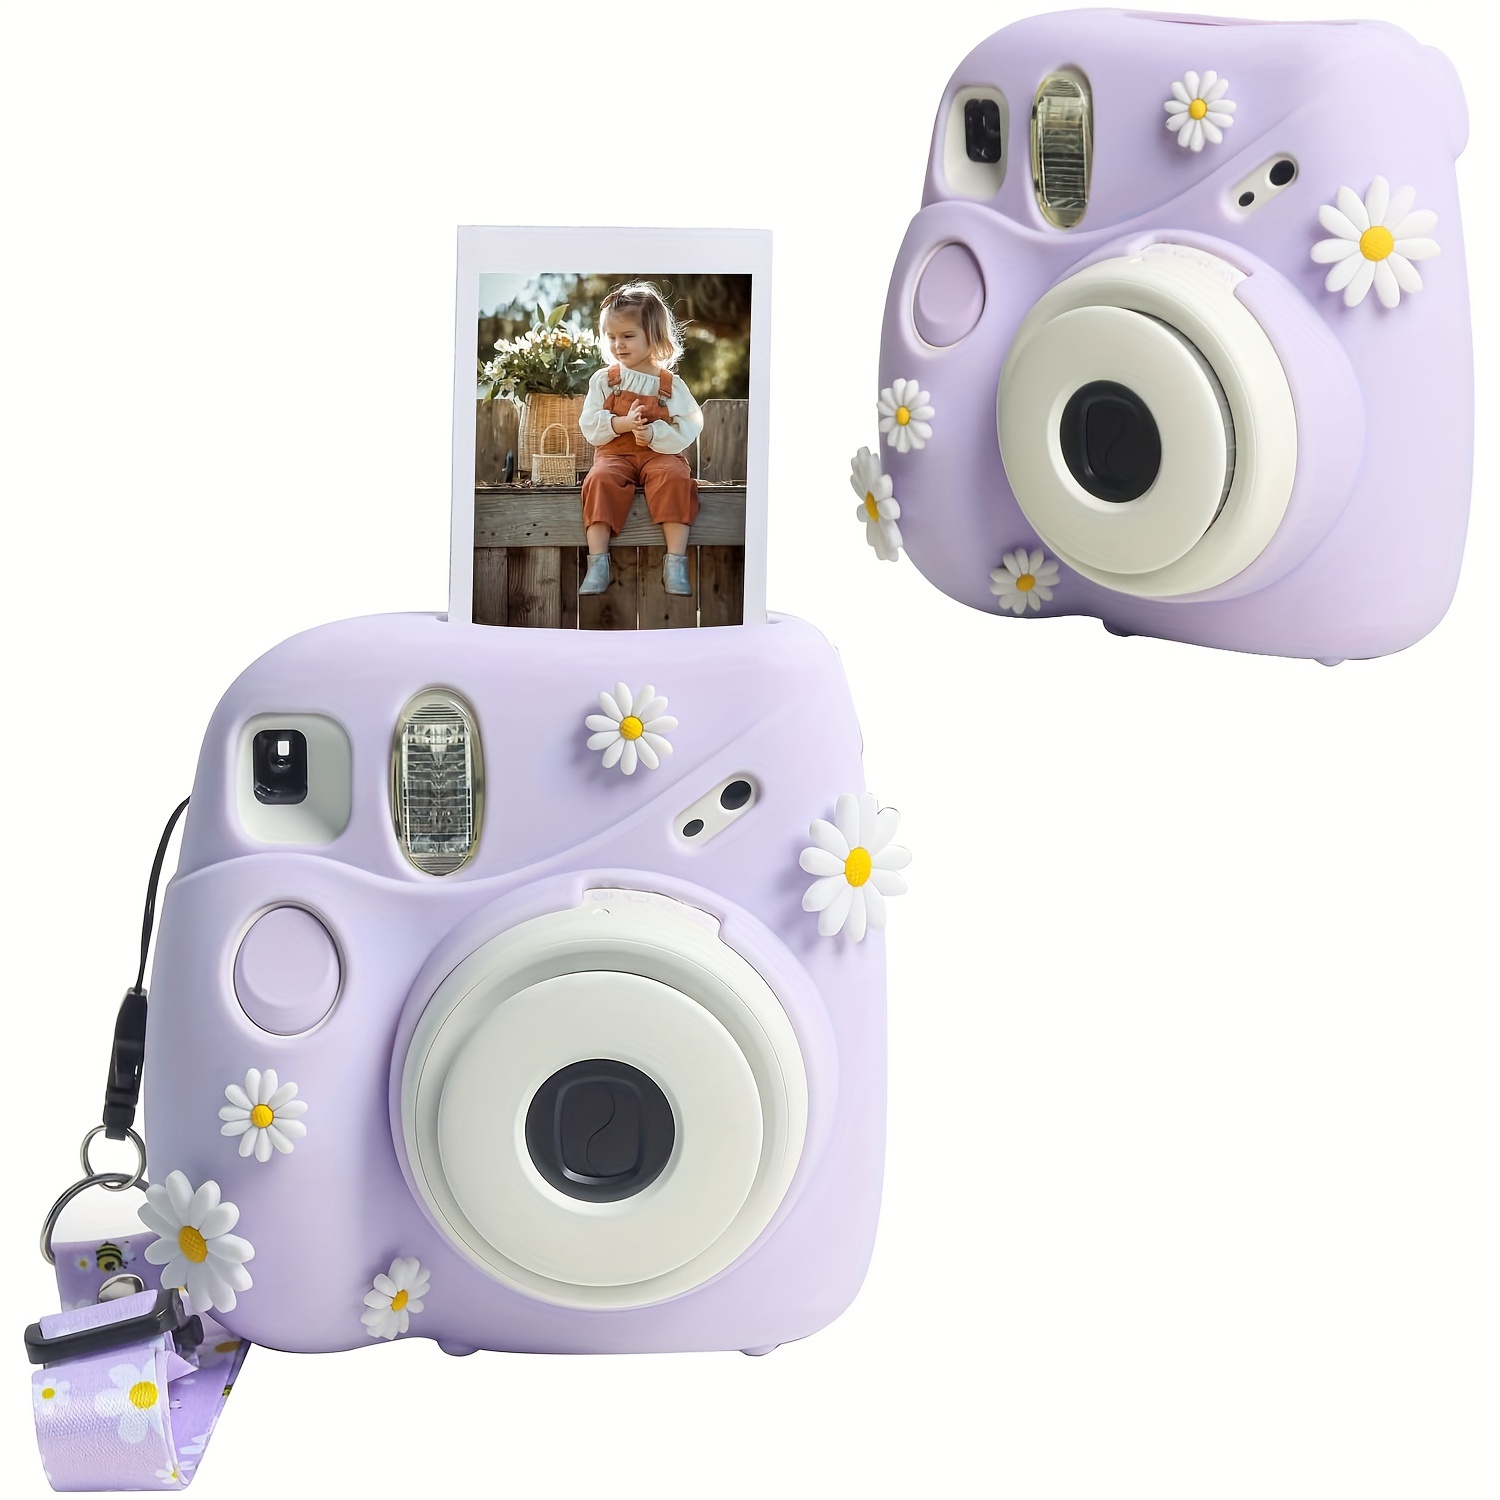  Fujifilm Instax Mini 12 Instant Camera with Fujifilm Instant  Mini Film (20 Sheets) with Accessories Including Compatible Case with  Strap, Photo Album, Stickers, Frames Bundle (Pastel Blue) : Electronics